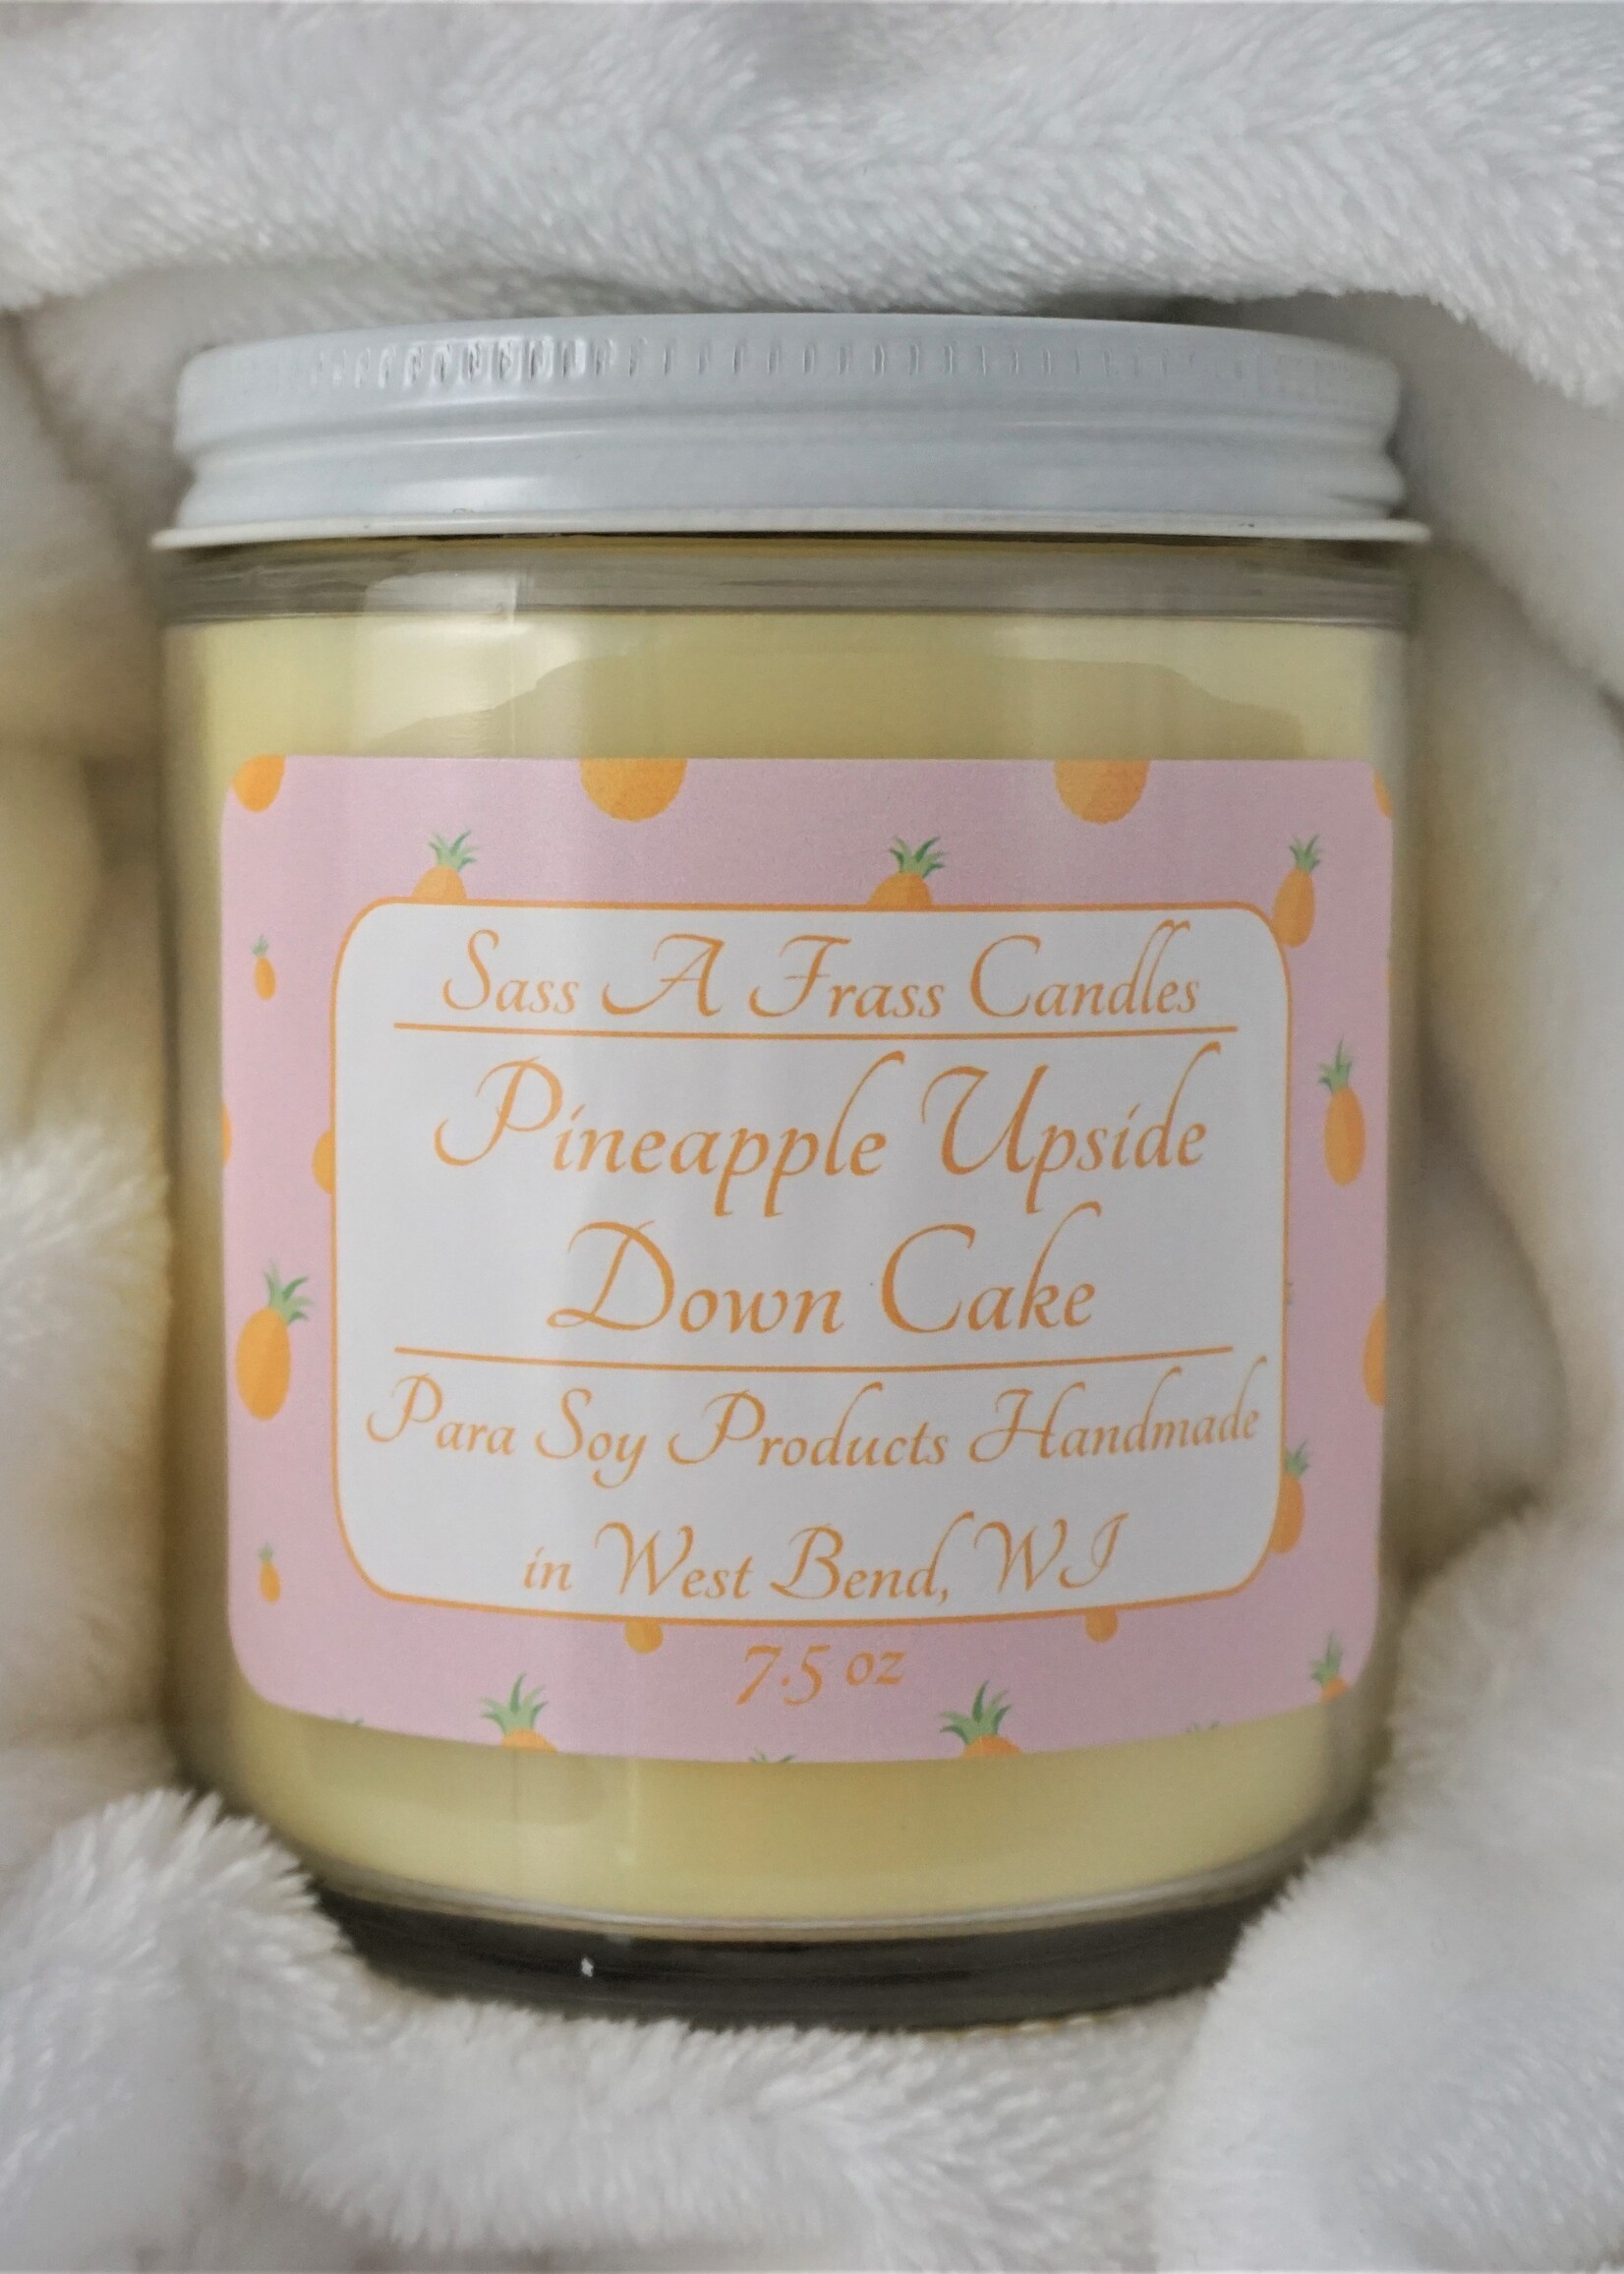 Pineapple Upside Down Cake 7.5 oz Candle